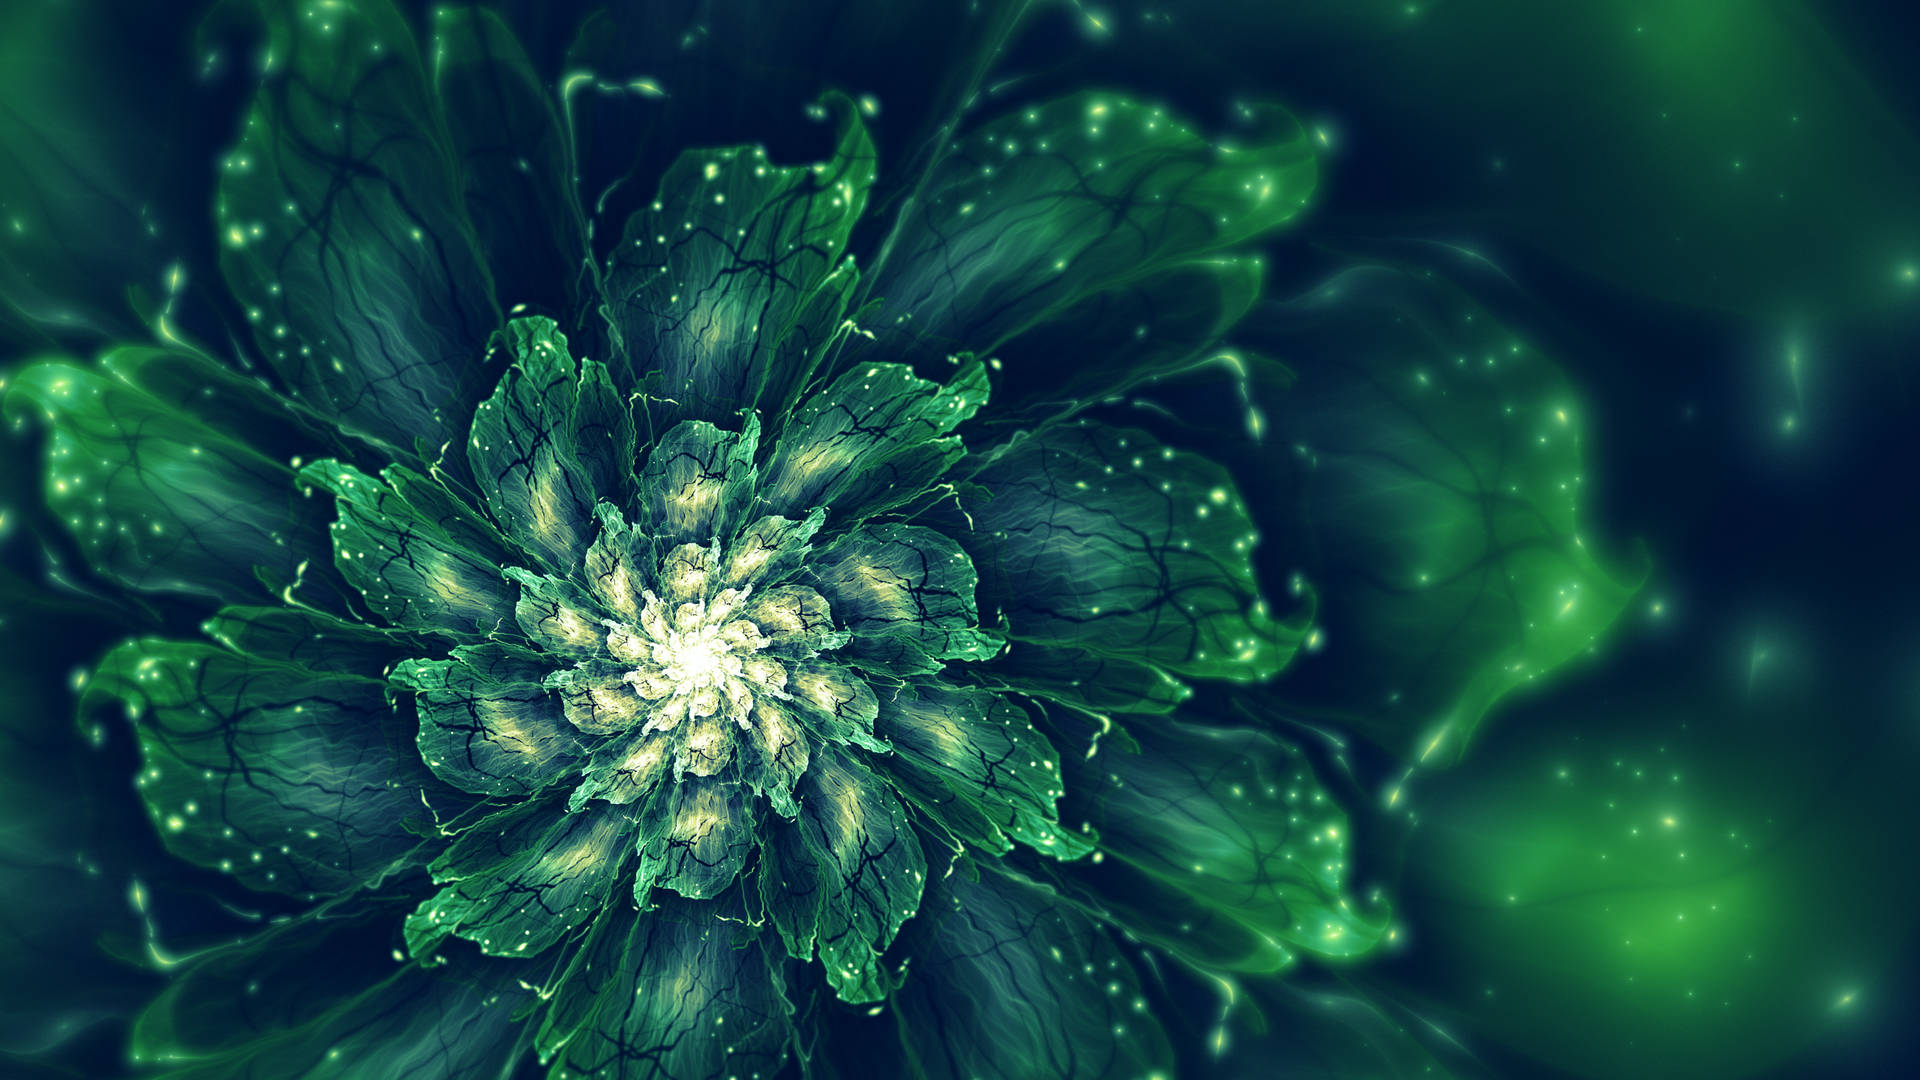 Fractal 2560X1440 Wallpaper and Background Image